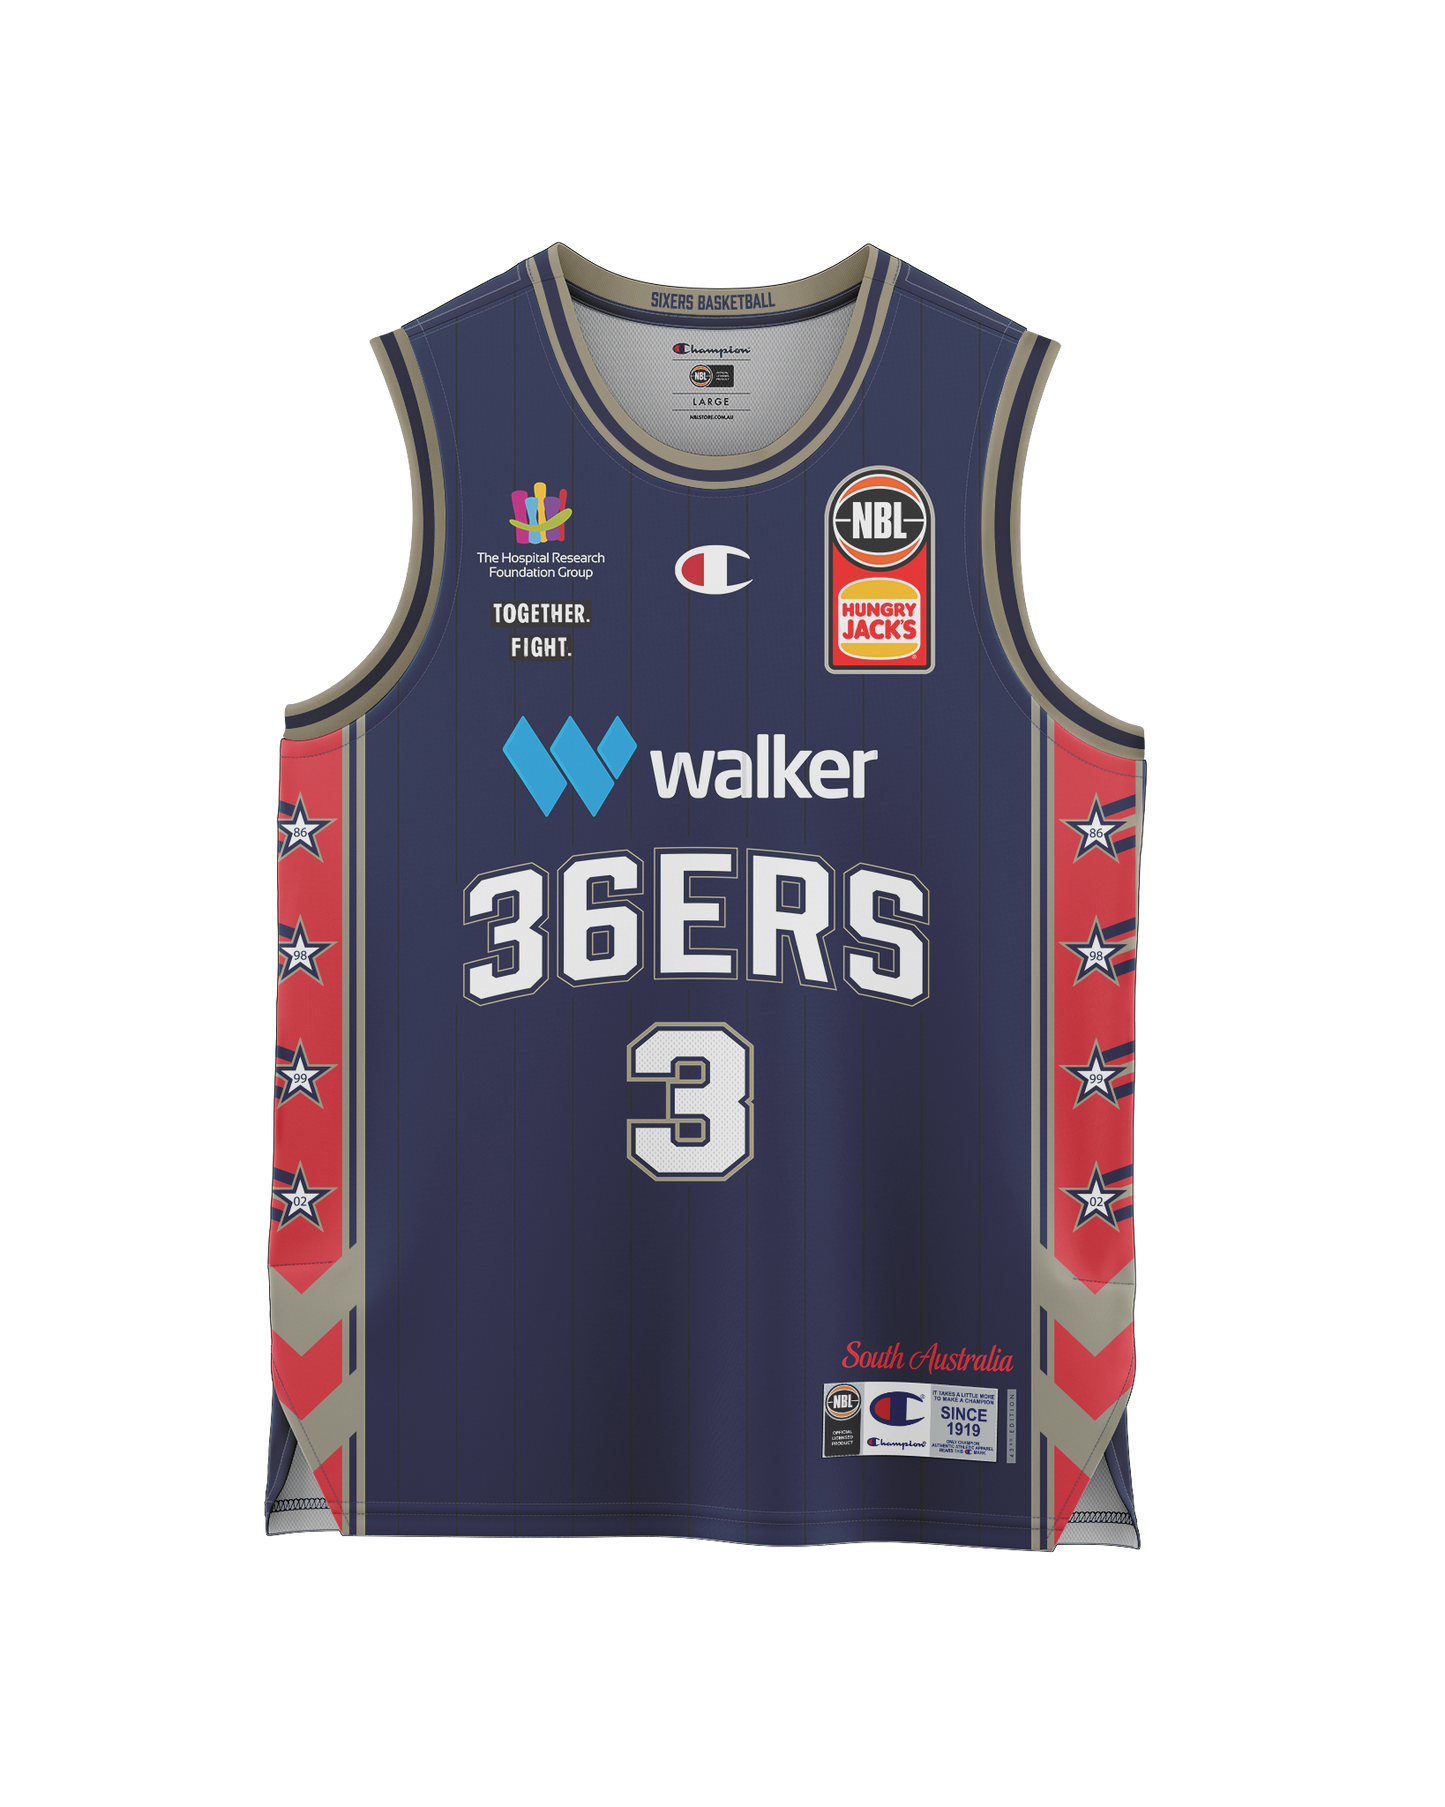 Adelaide 36ers 2021/22 Authentic Adult Home Jersey - Dusty Hannahs